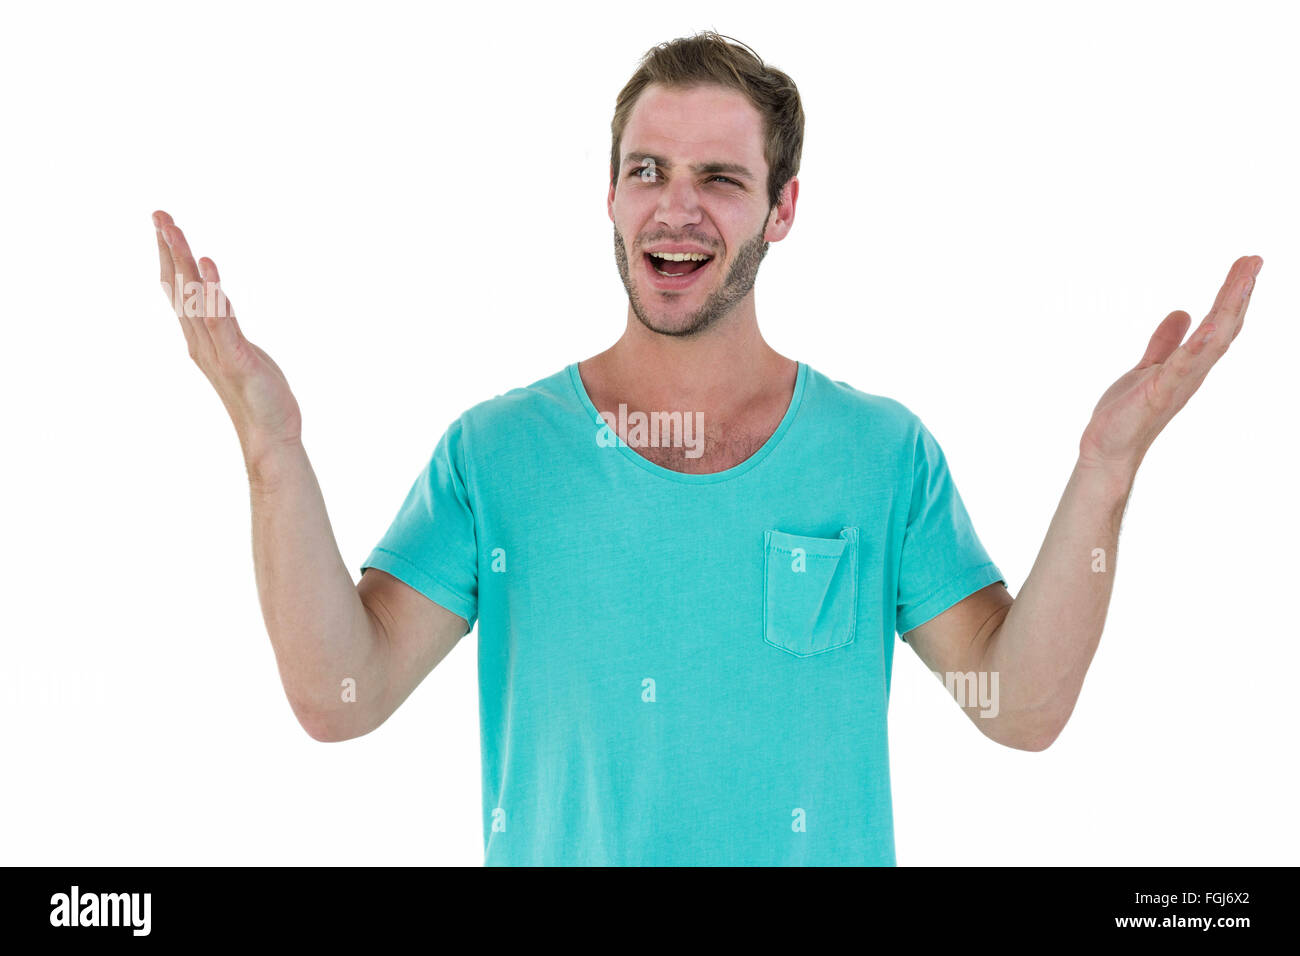 Hipster man doing hand gesture Stock Photo